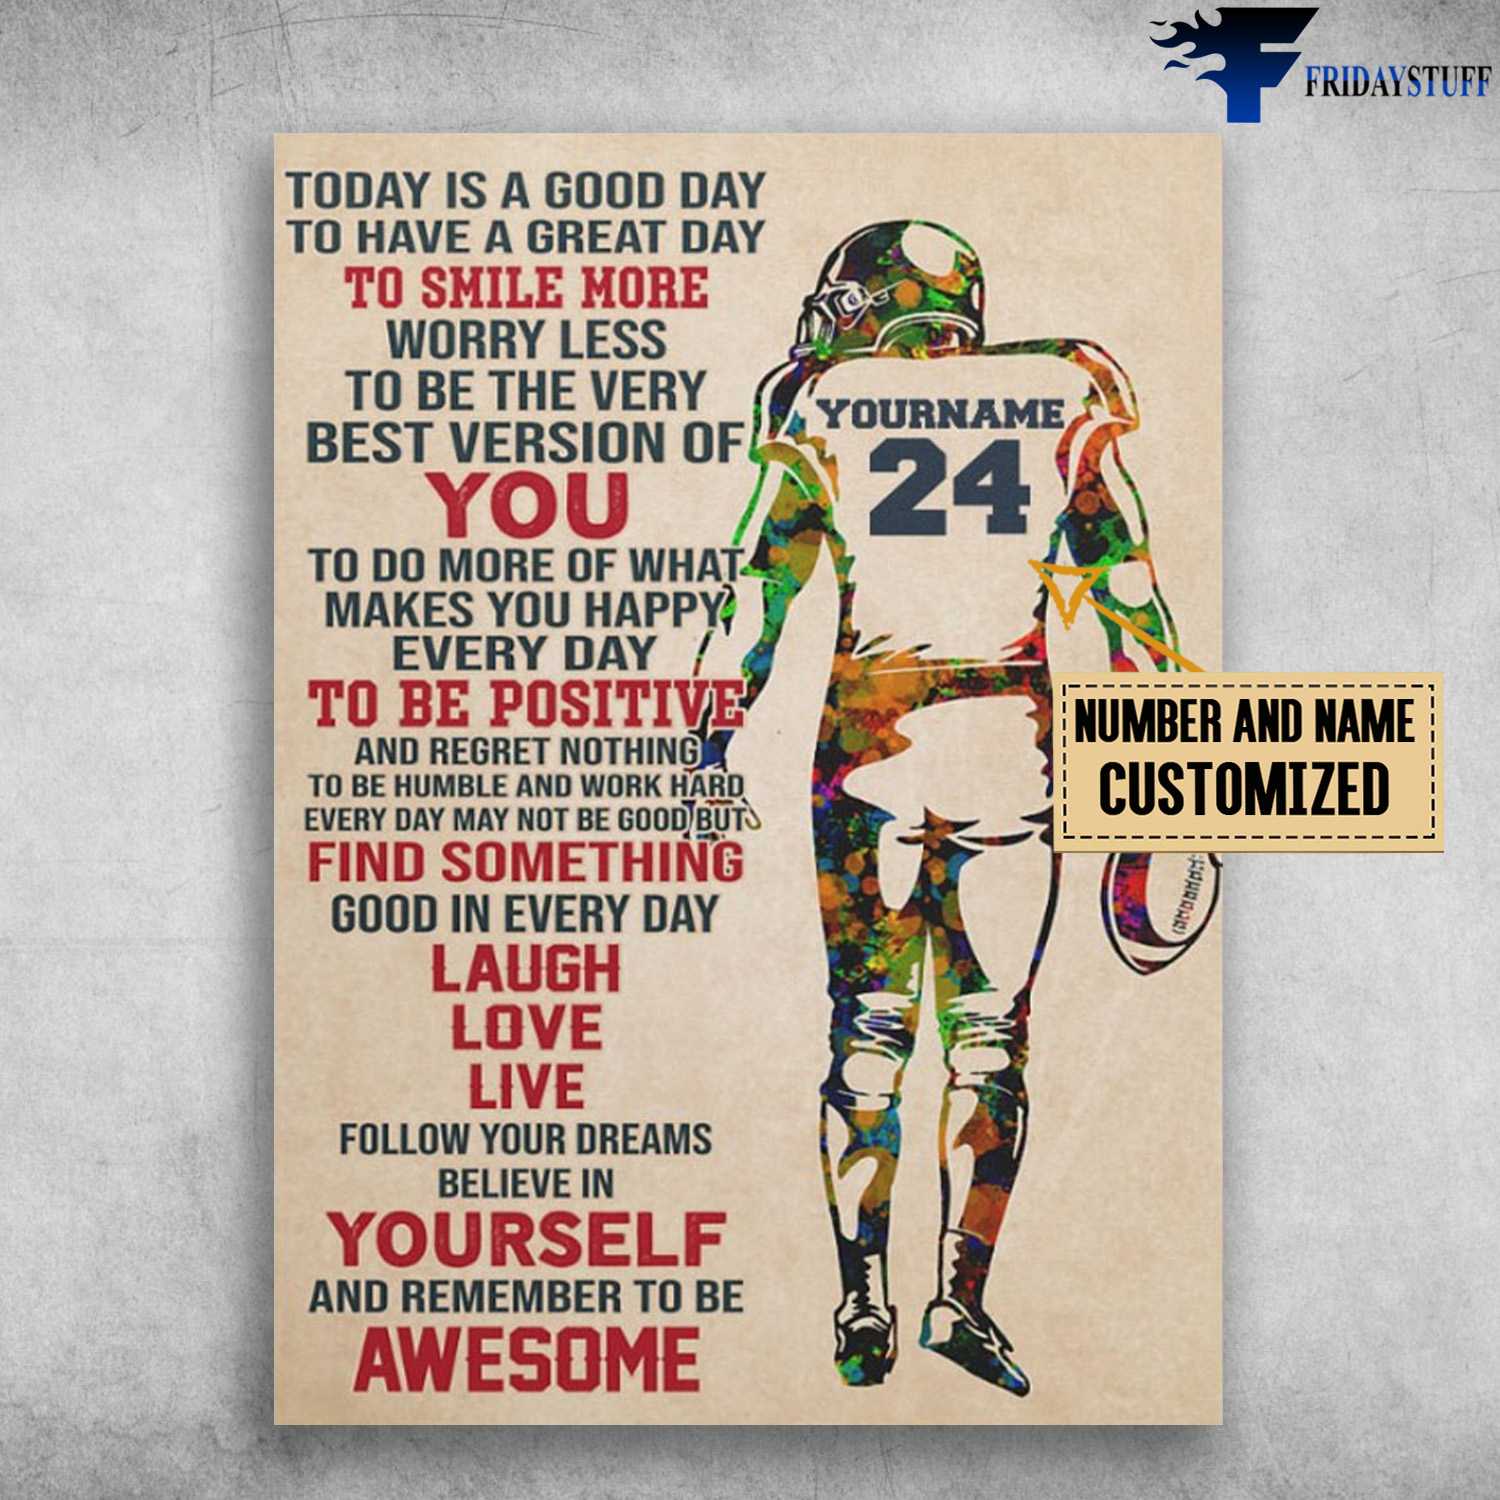 Football Poster, Football Decor, Baseball Lover, Baseball Poster, Today Is A Good Day, To Have A Great Day, To Smile More Worry Less, To Be The Very Best Version Of You